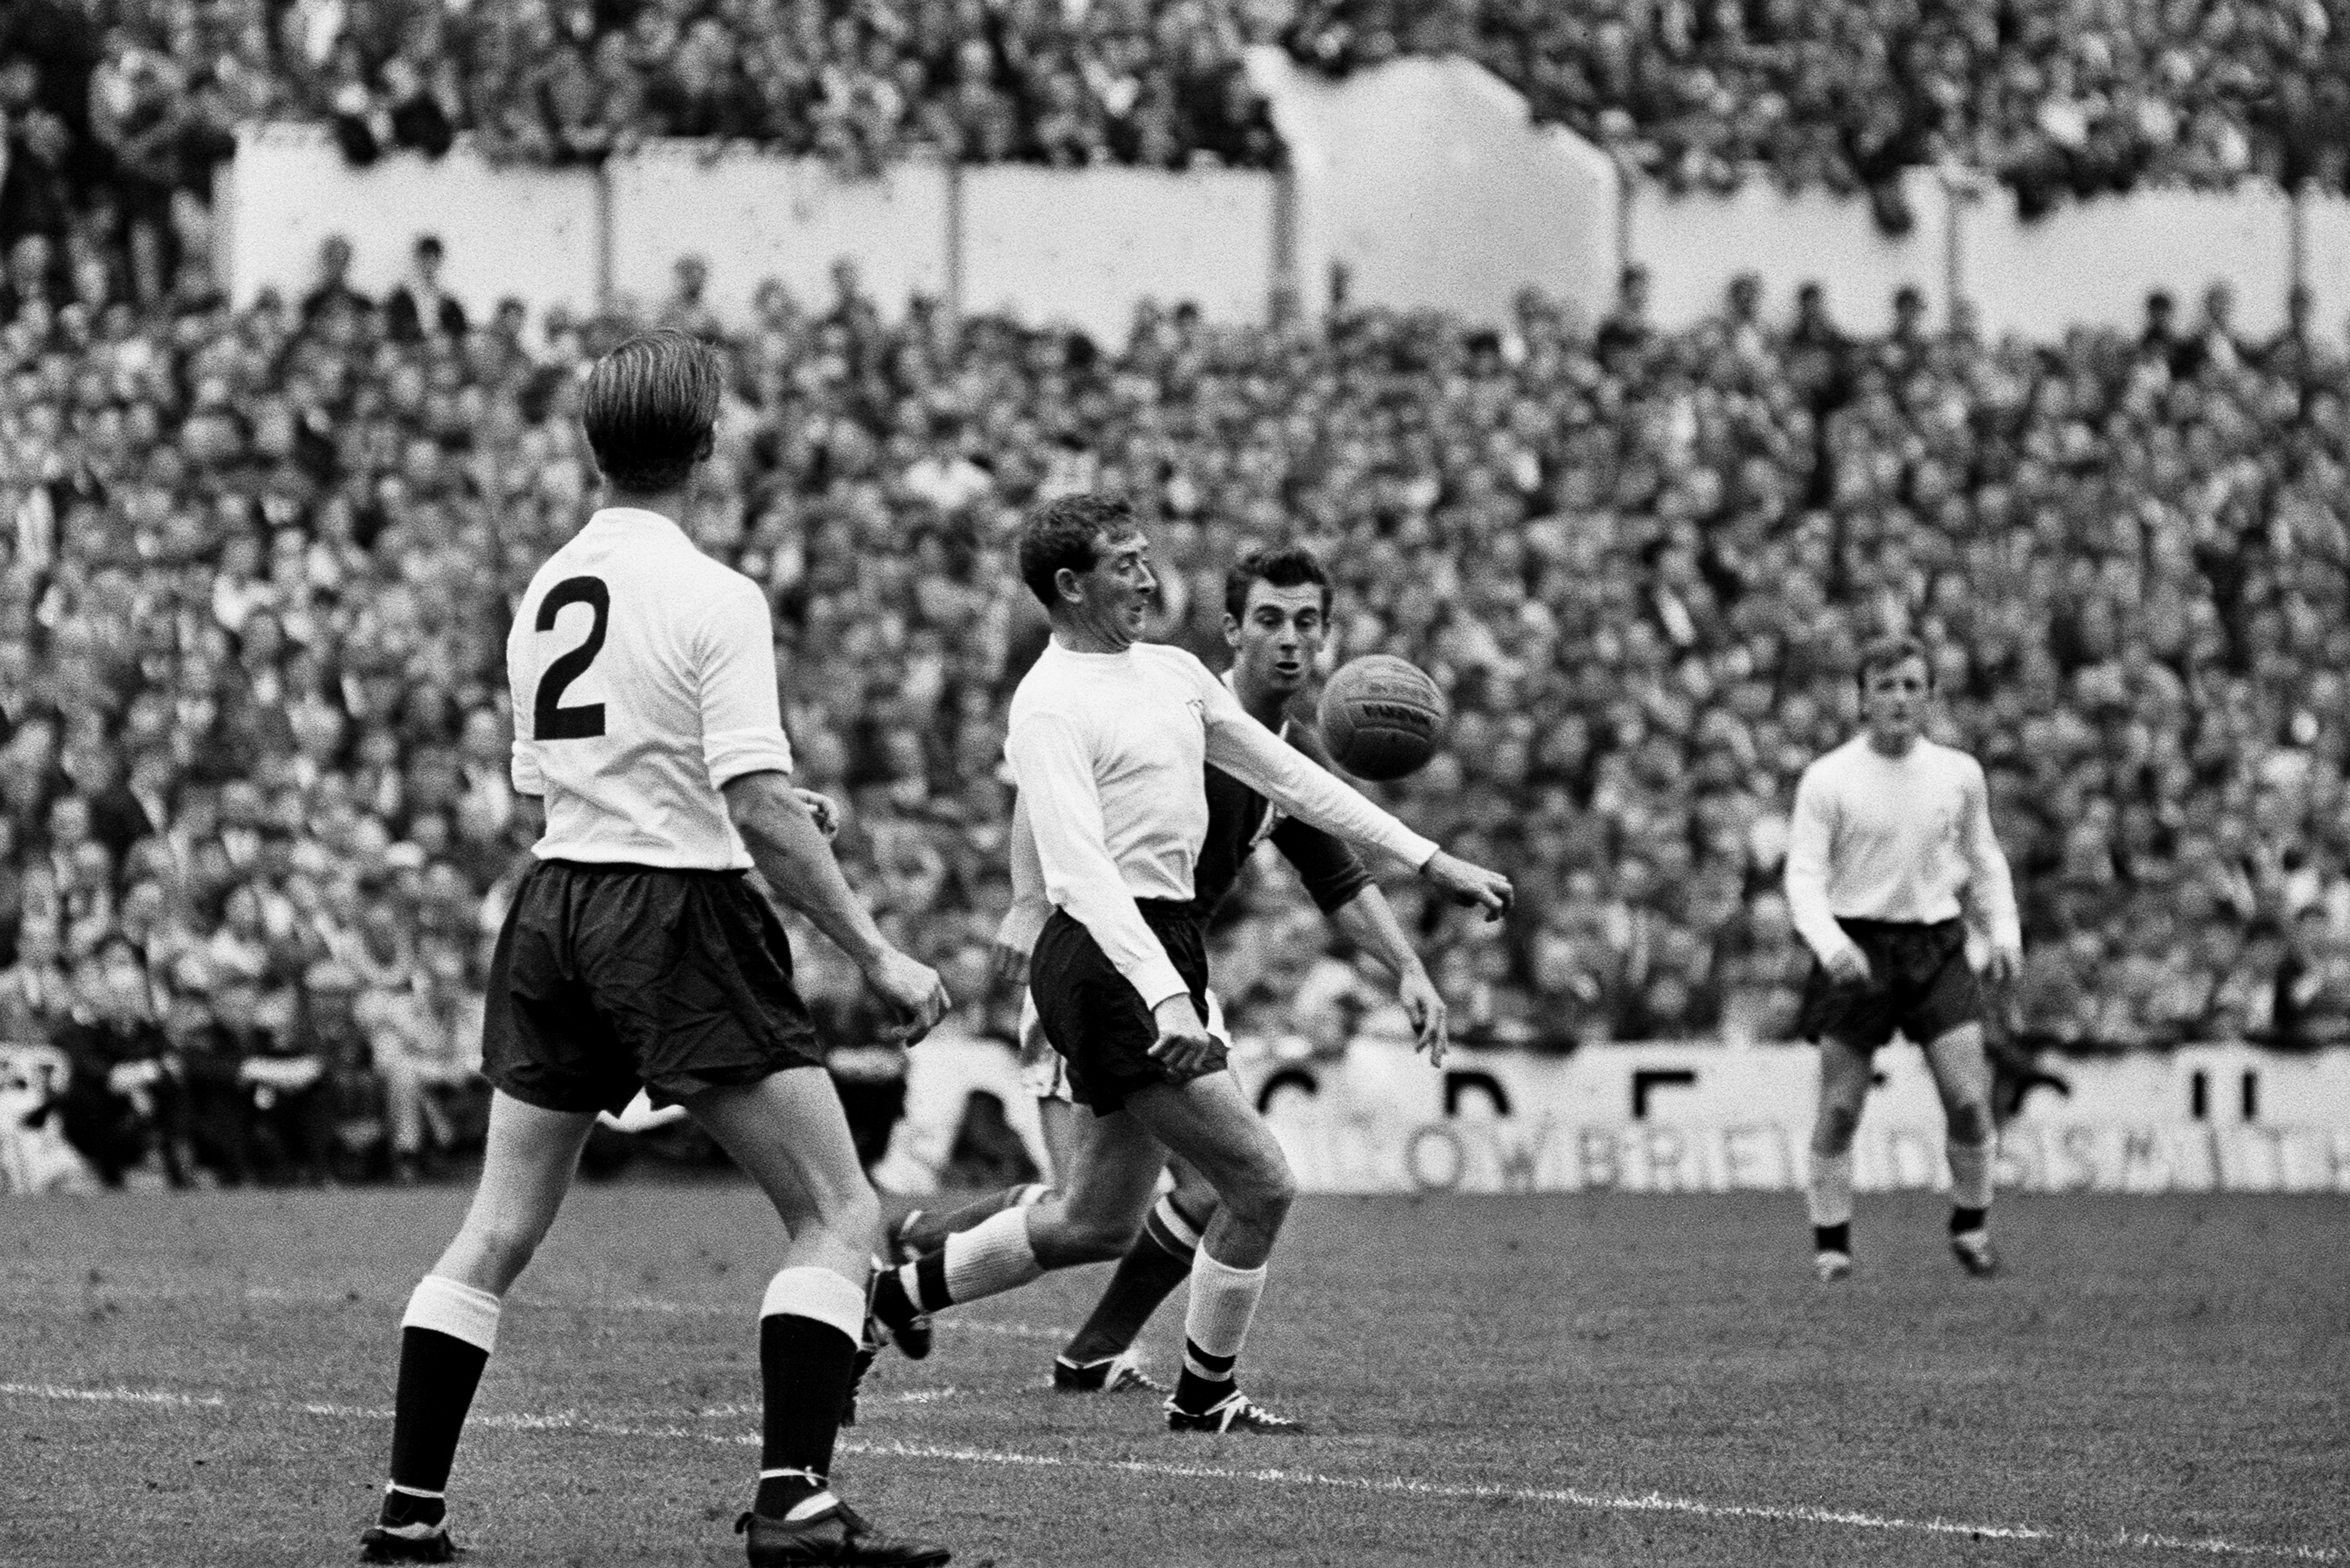 Tottenham's Danny Blanchflower controls the ball in a match against Nottingham Forest in 1963.